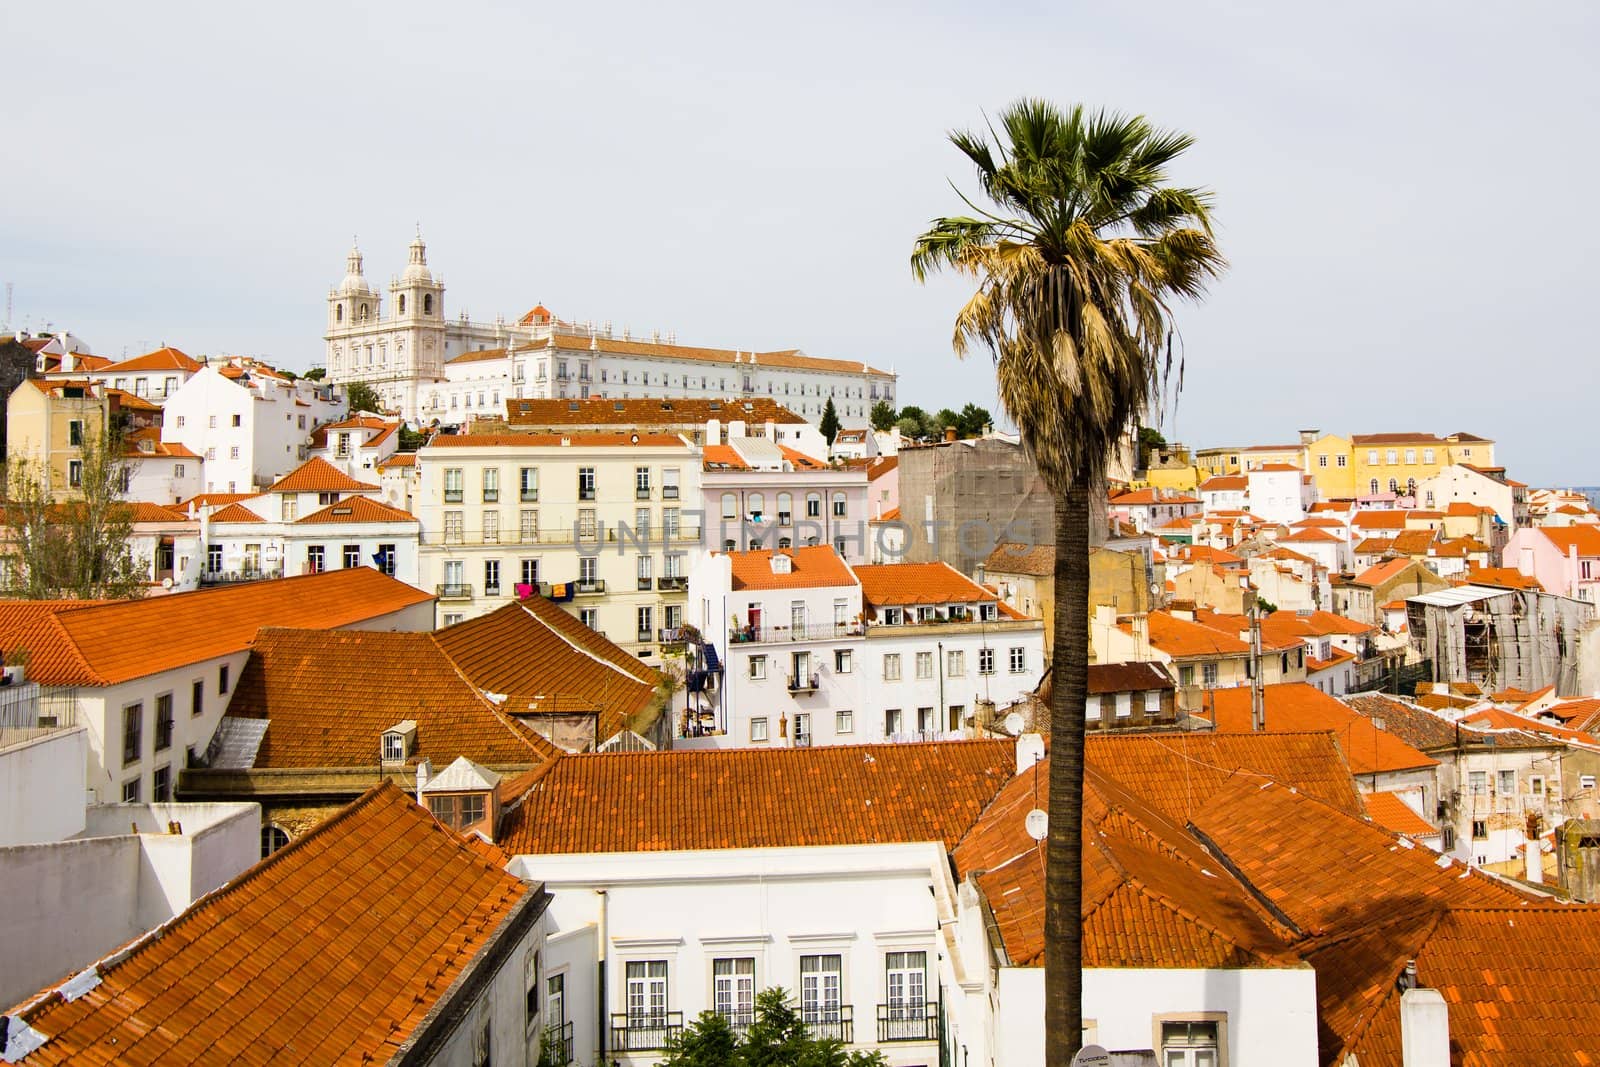 Panorama of ancient city of Lisbon with red roofs, palm in front